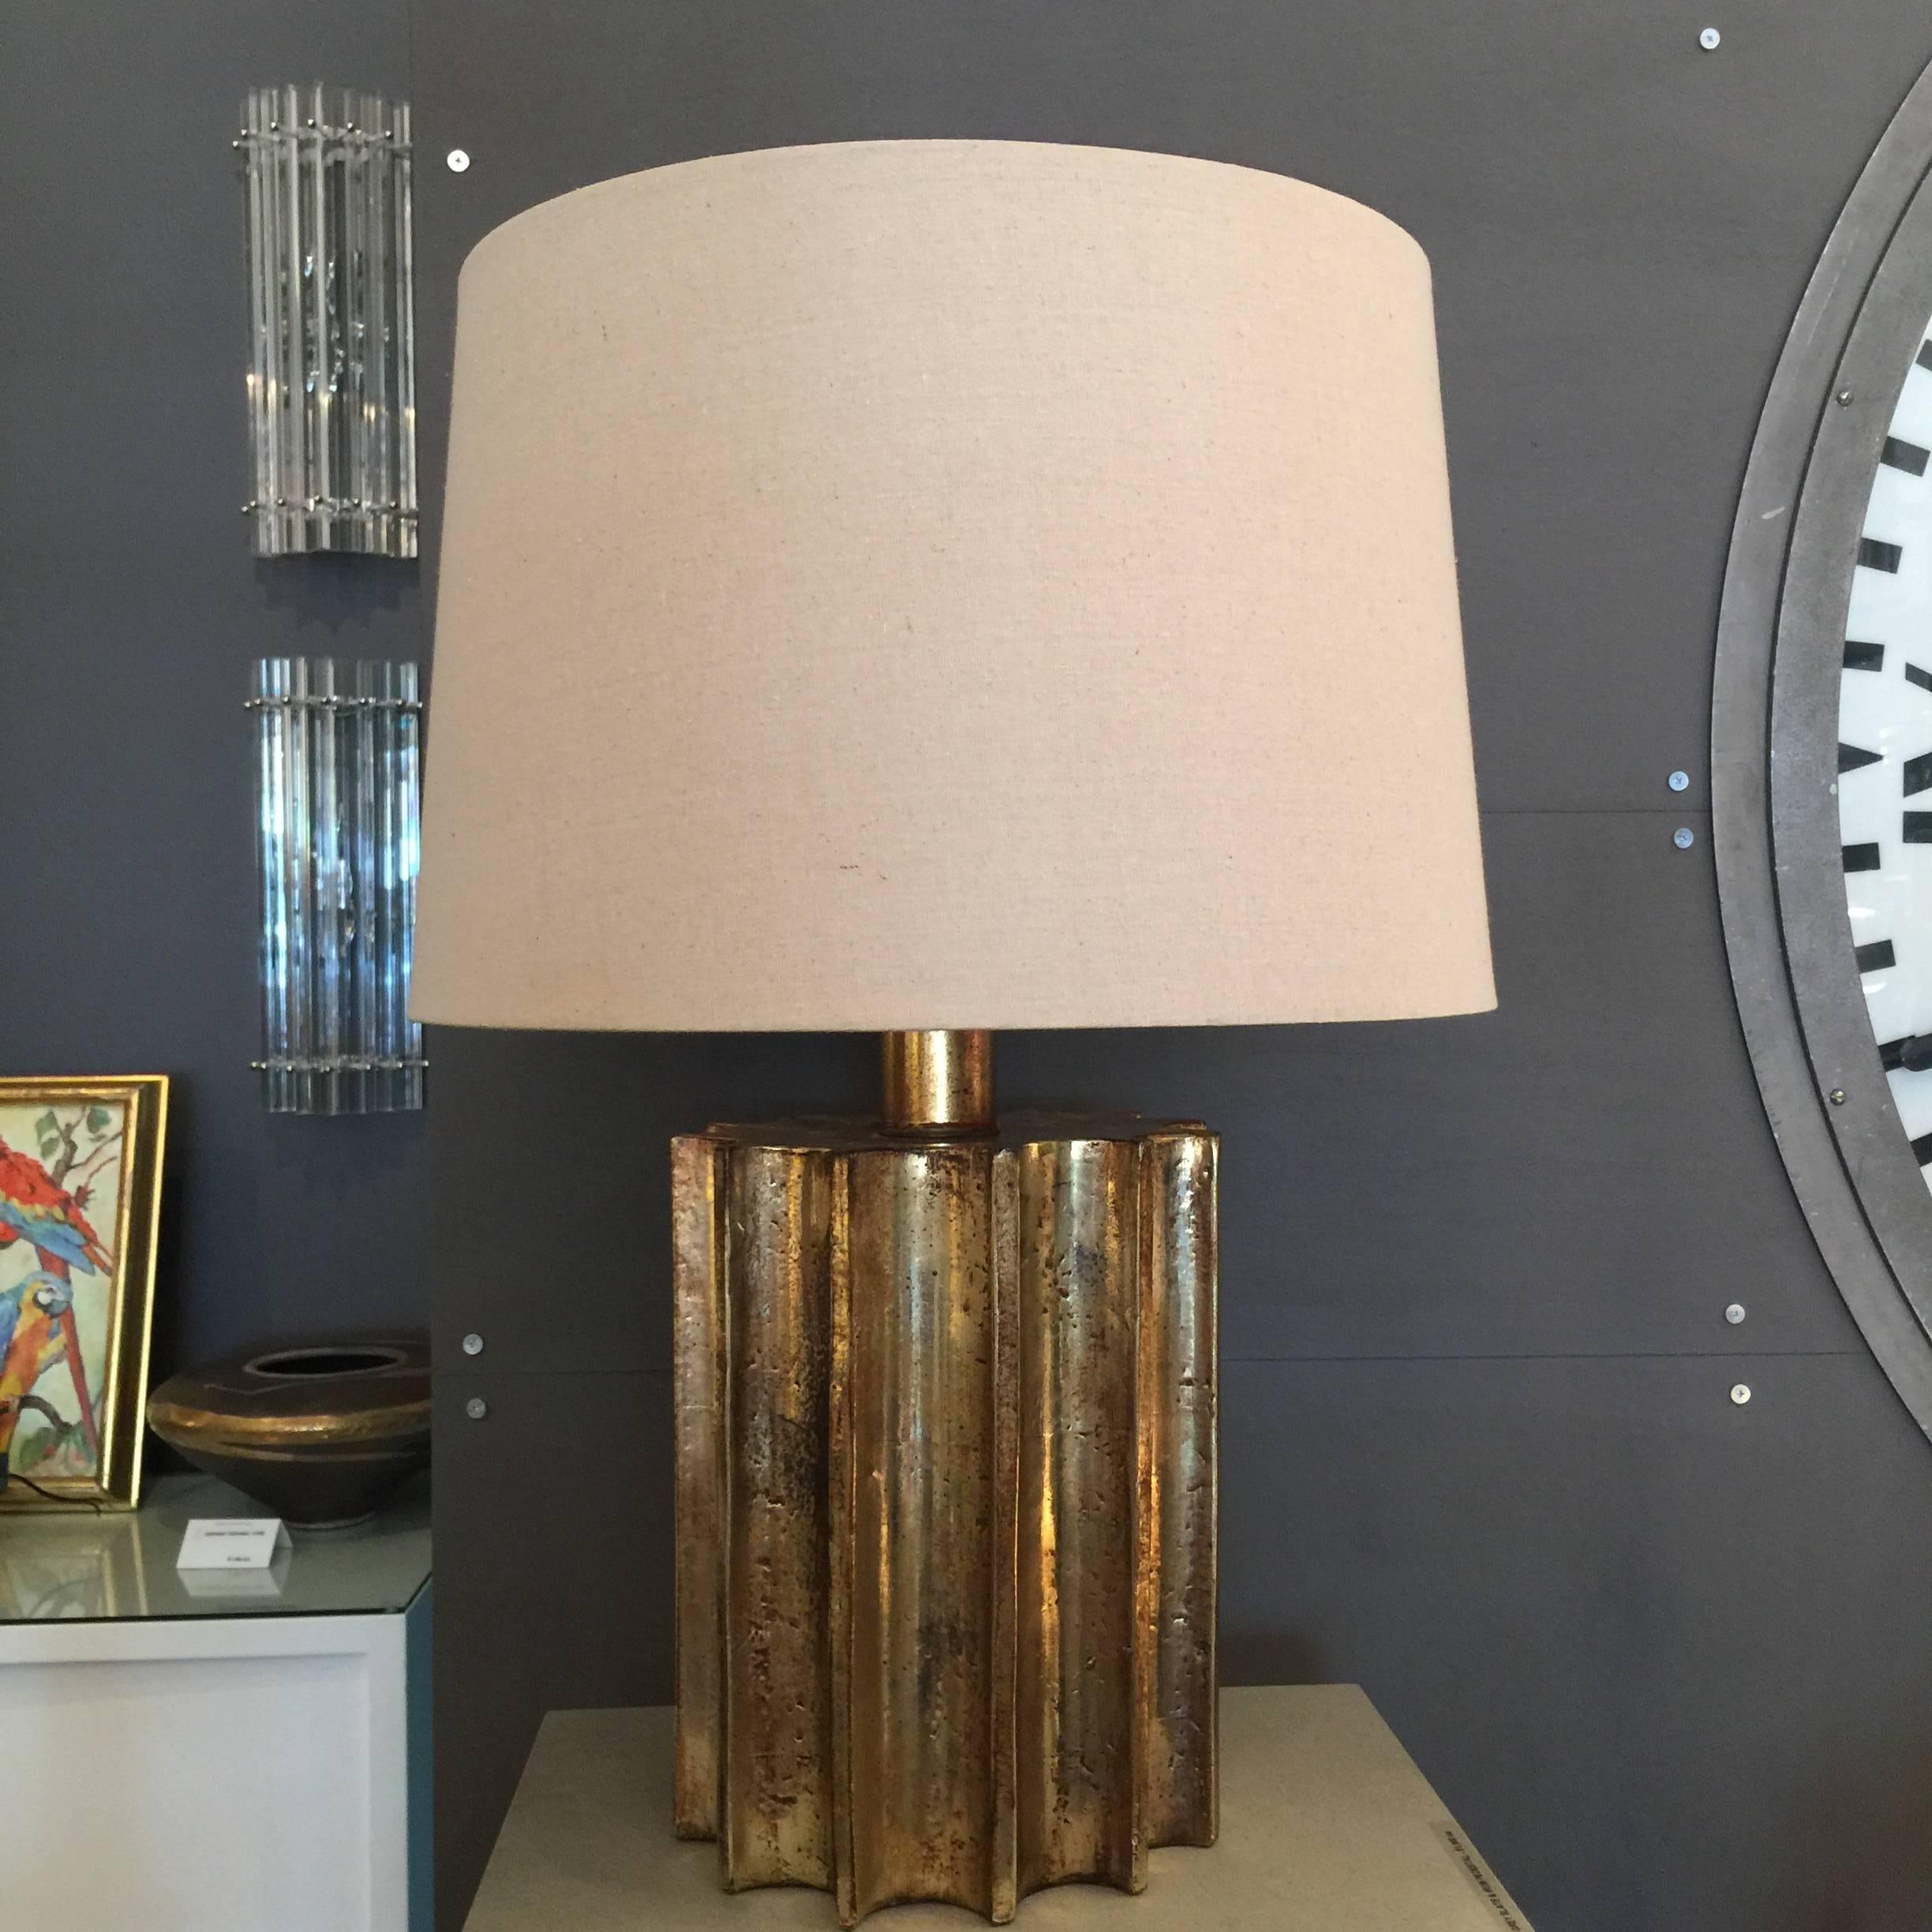 A gilt bronze finish with beautiful patina in gold - this heavy lamp by Chapman is in a mechanical gear design. Shade is new and included.